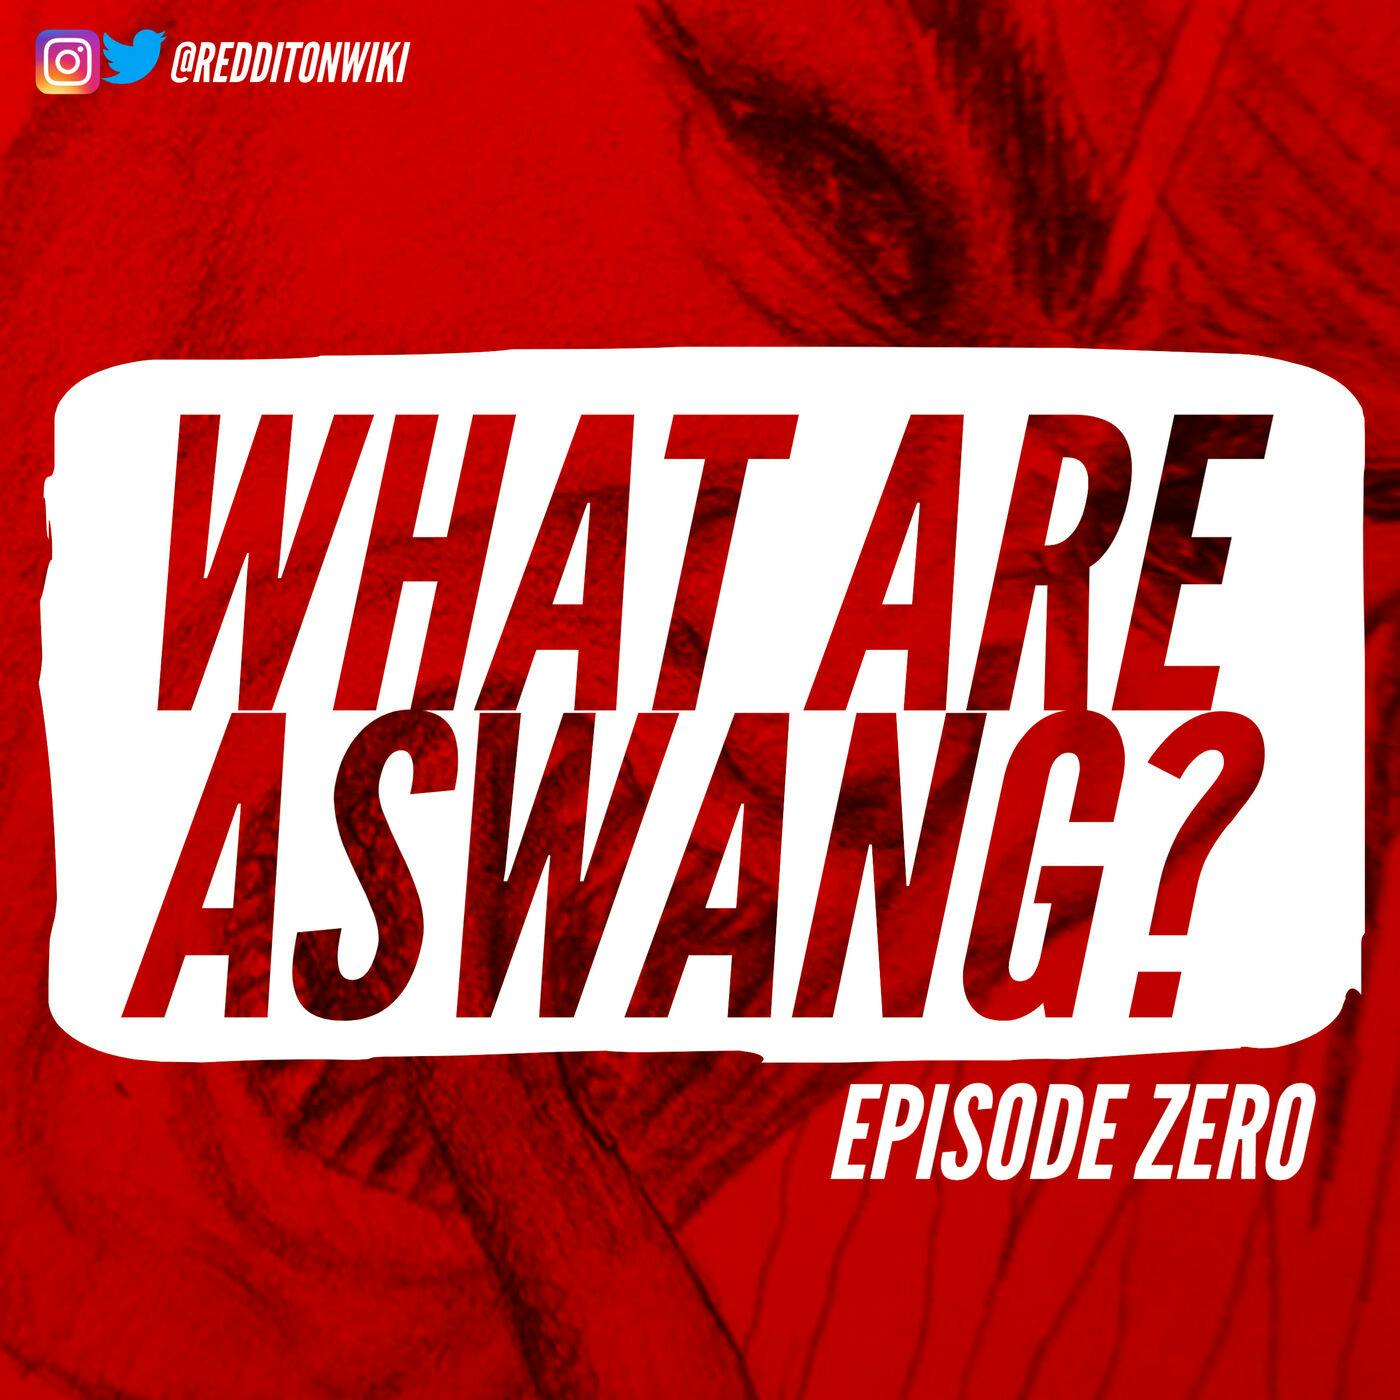 Reddit on Wiki- Test Dummie Episode- What are Aswang?